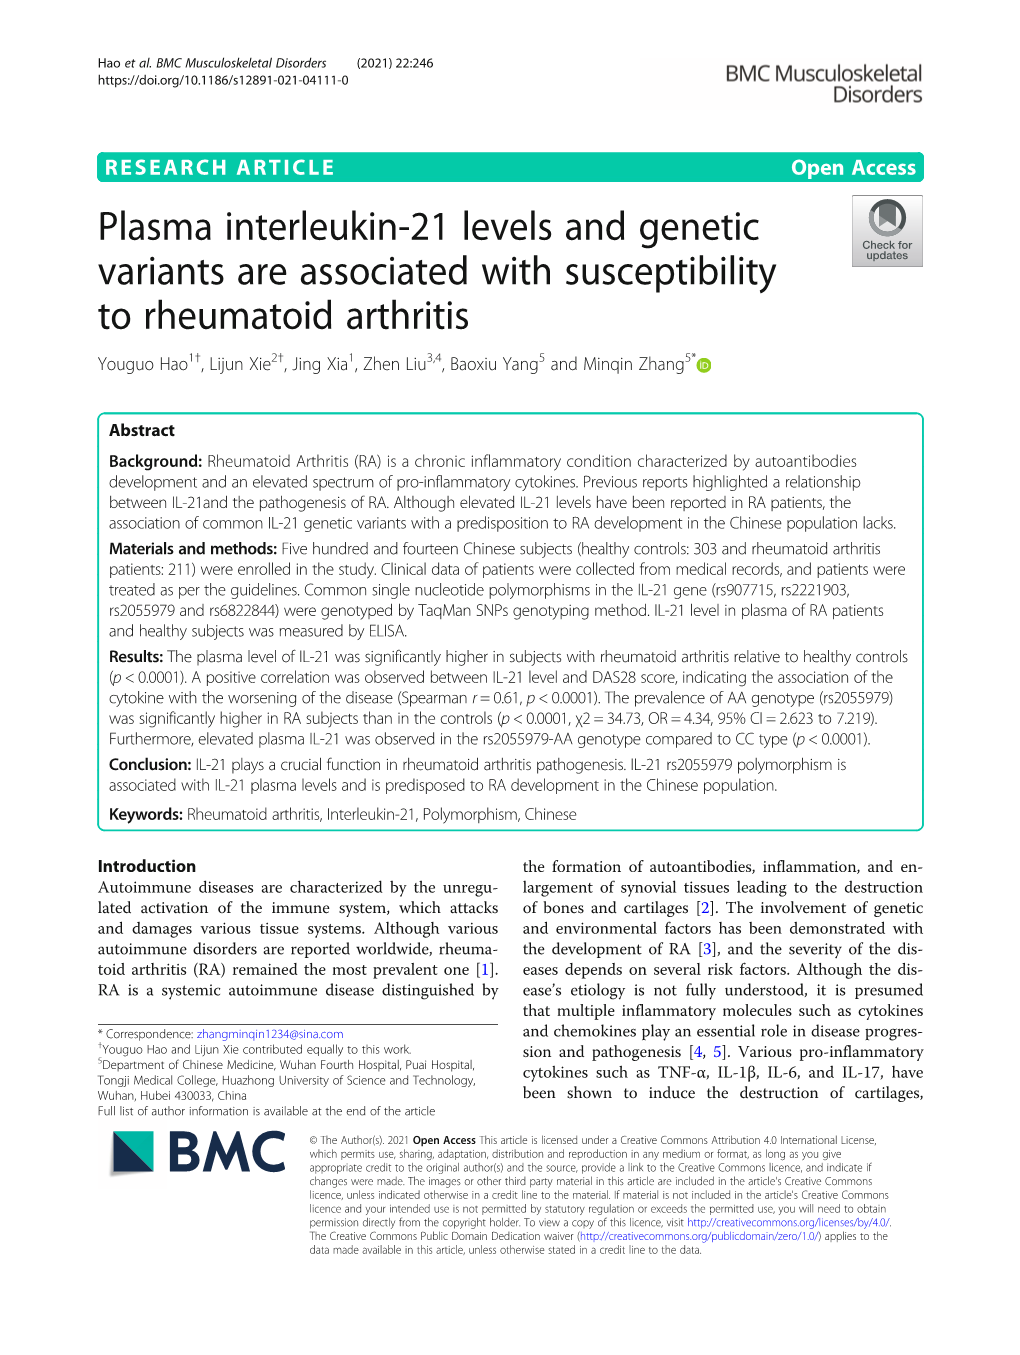 Plasma Interleukin-21 Levels and Genetic Variants Are Associated With